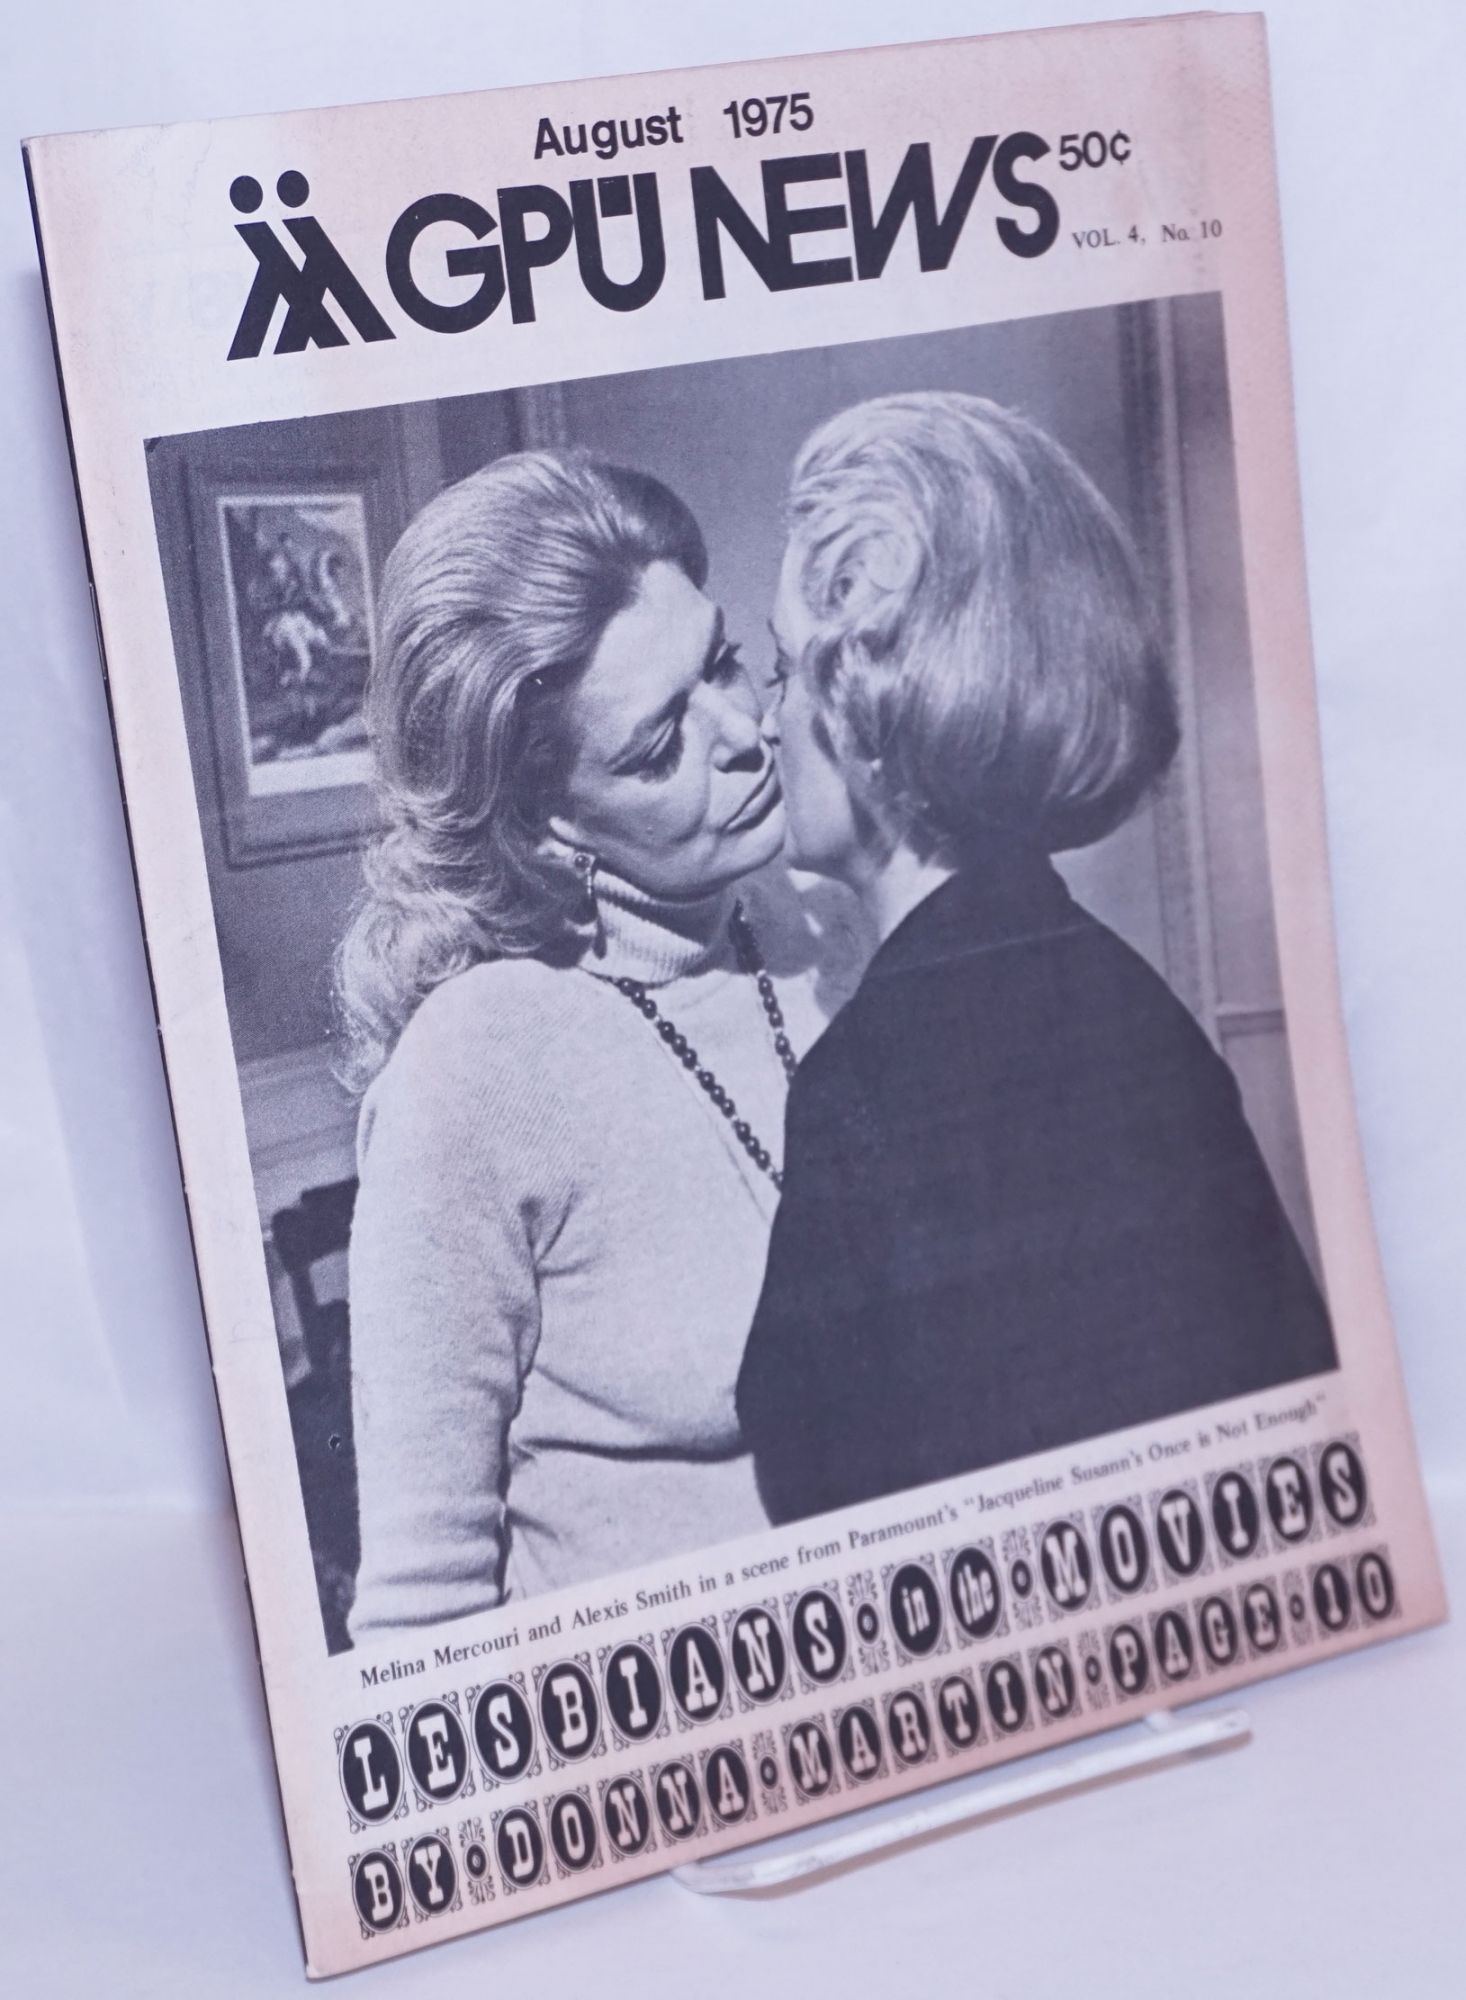 GPU News vol. 4, #10, August 1975: Lesbians in the Movies by Gay